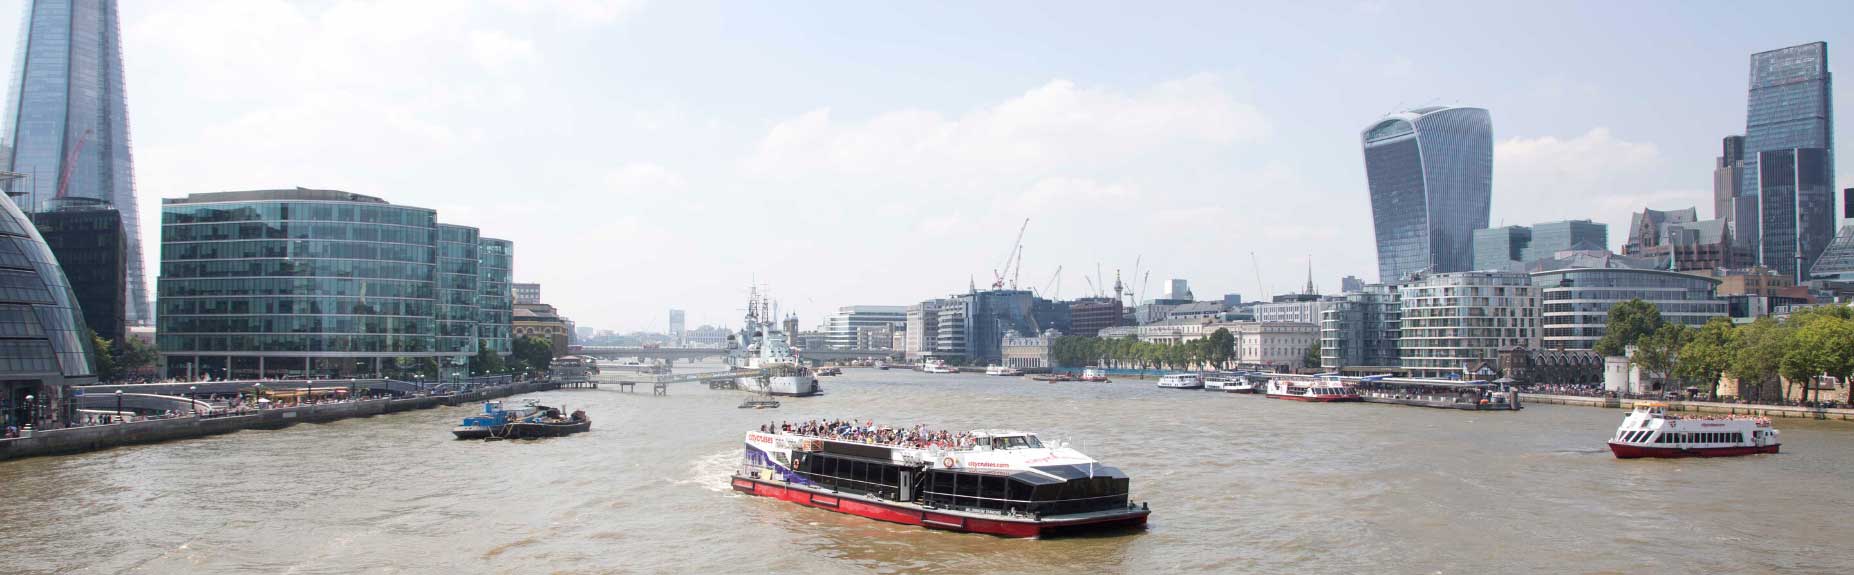 Two City Cruise boats on River Thames city on either side